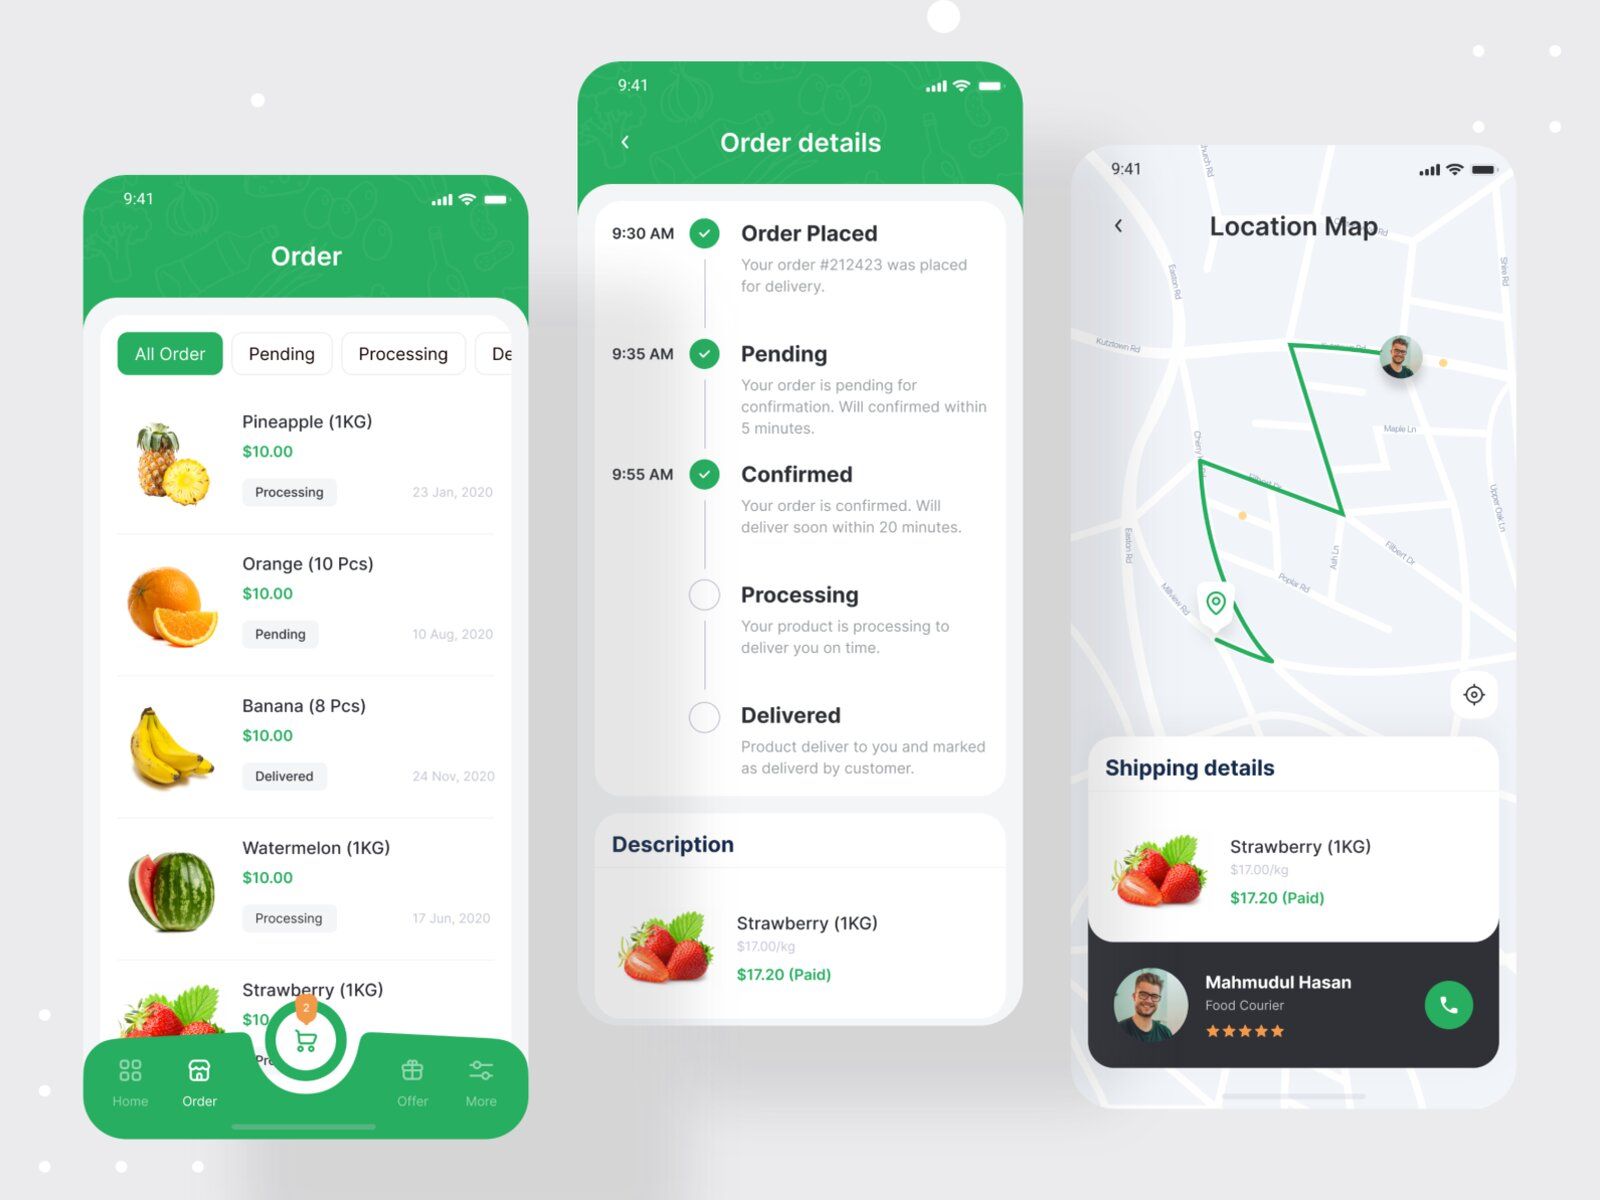 Push notifications can inform about order’s changes (*image by [Mahmudul Hasan Manik](https://dribbble.com/mhmanik02){ rel="nofollow" target="_blank" .default-md}*)